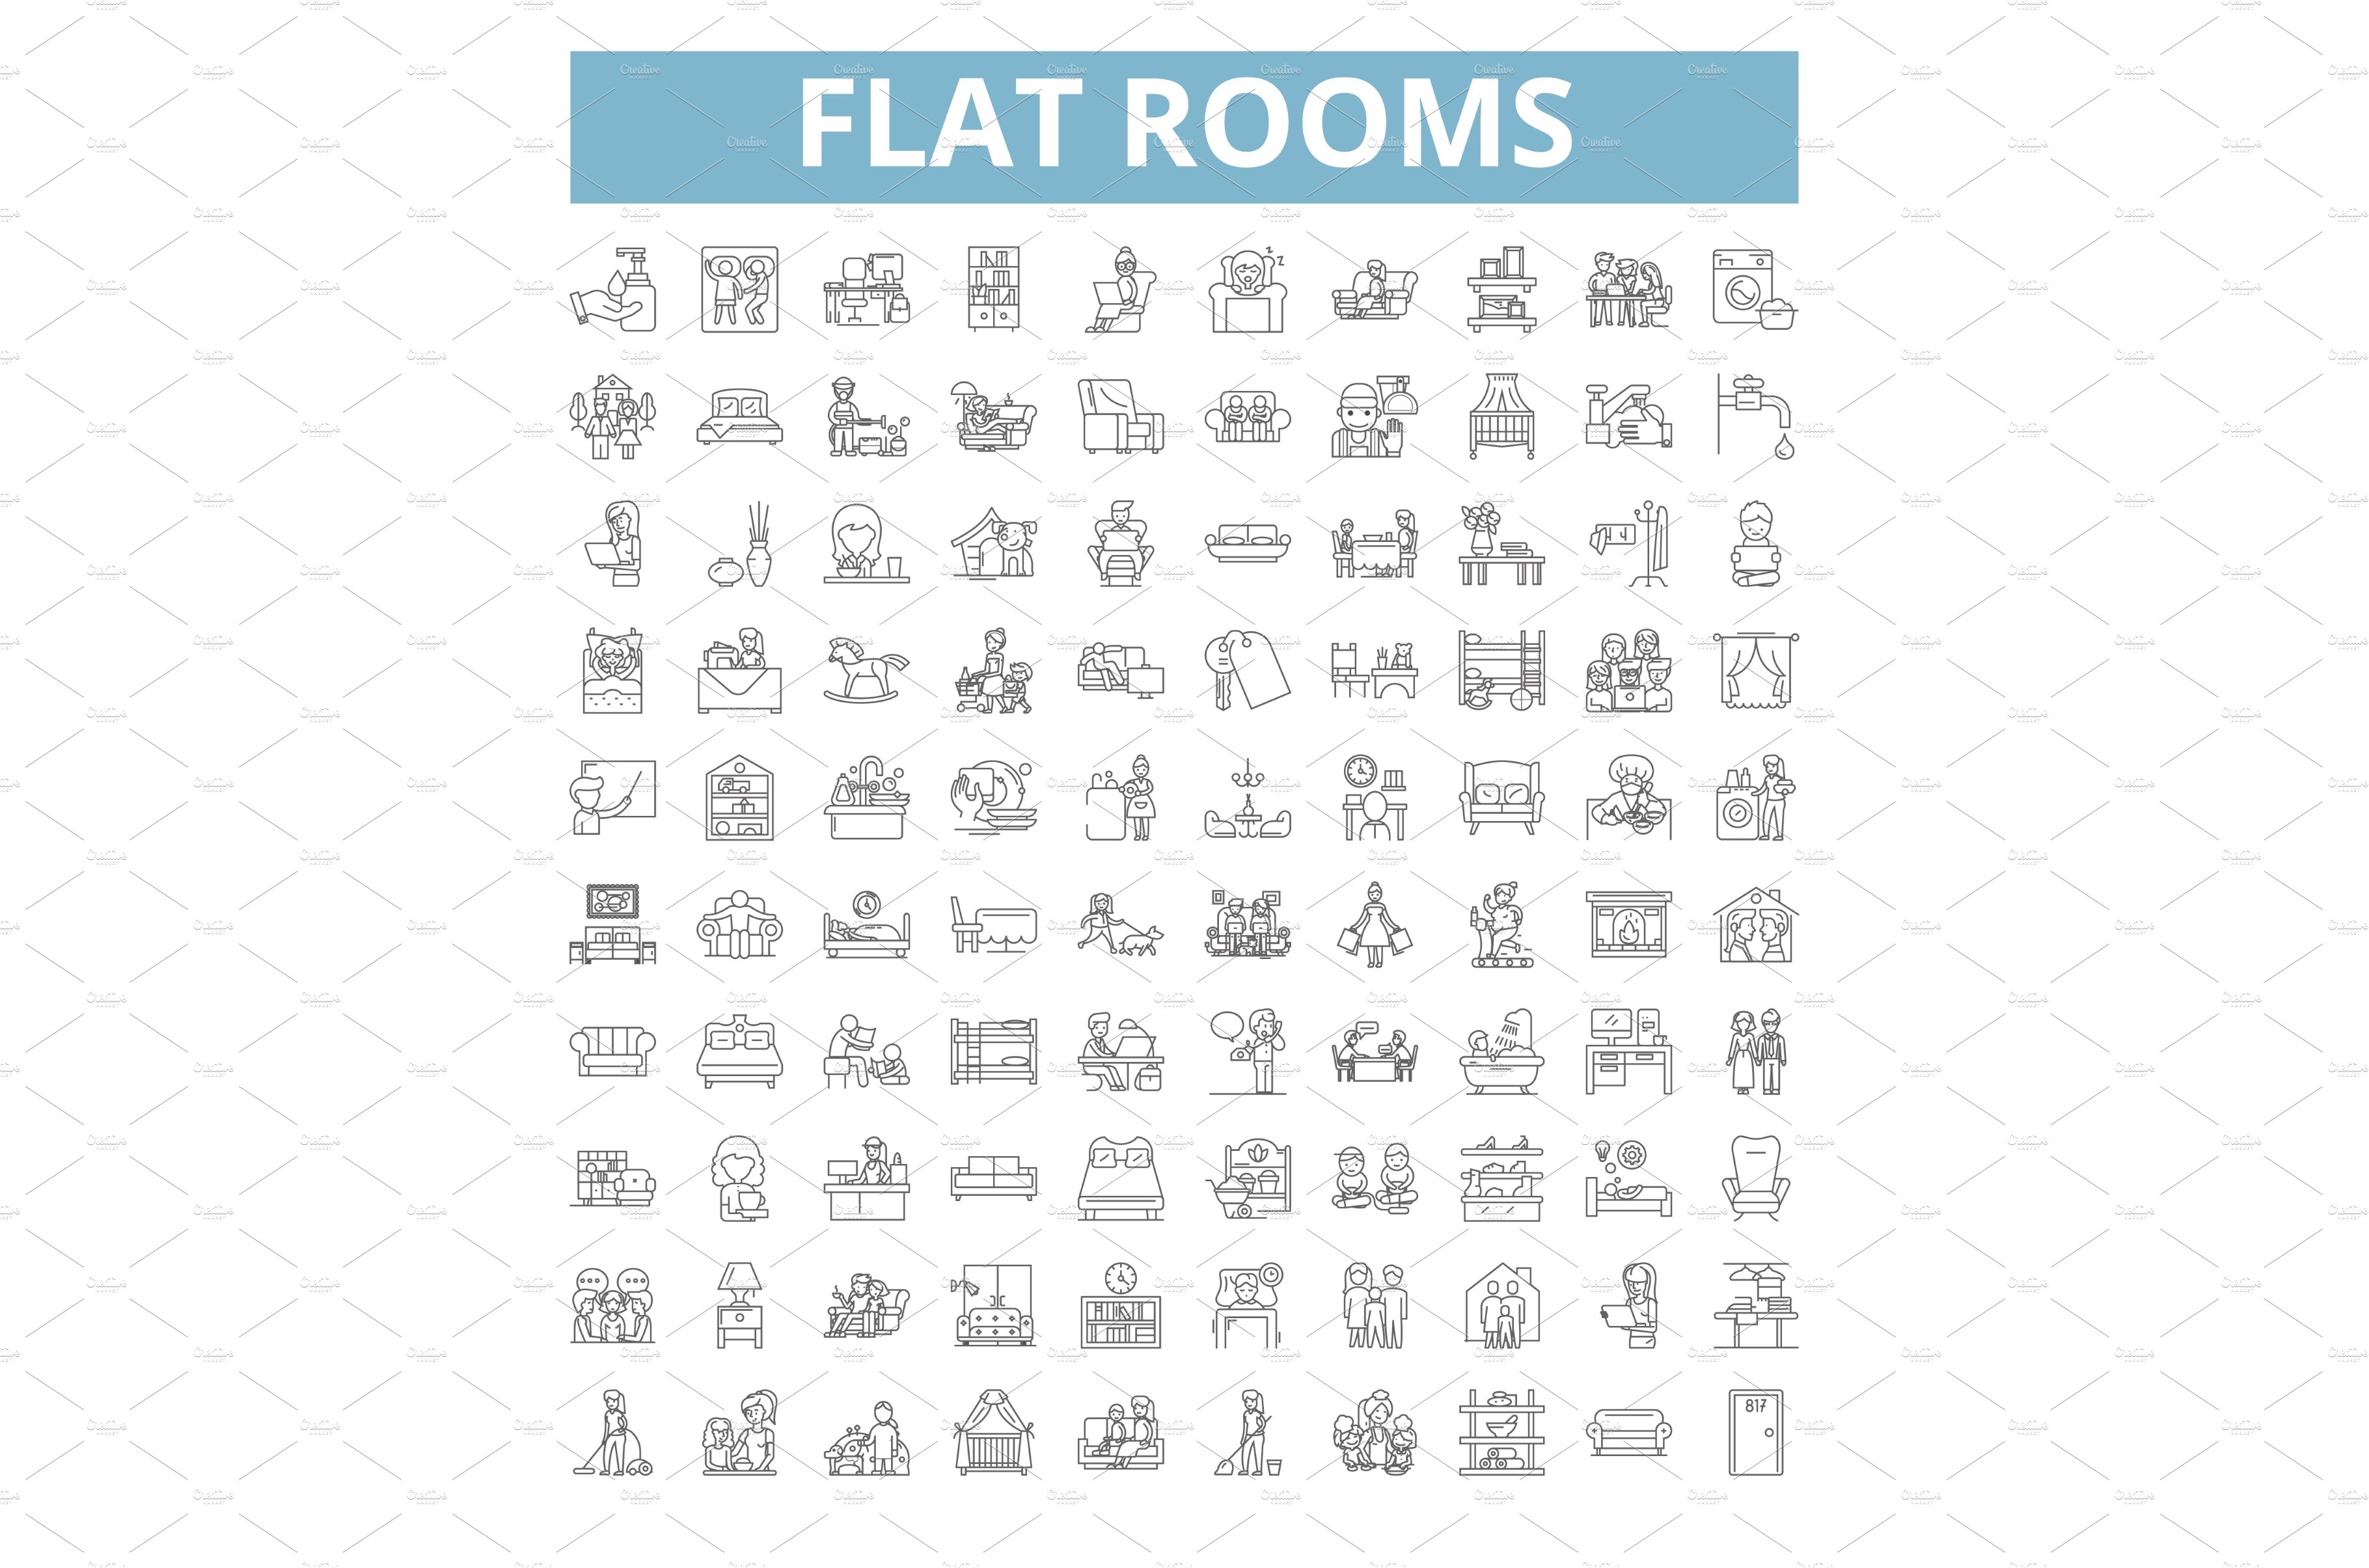 Flat rooms icons, line symbols, web cover image.